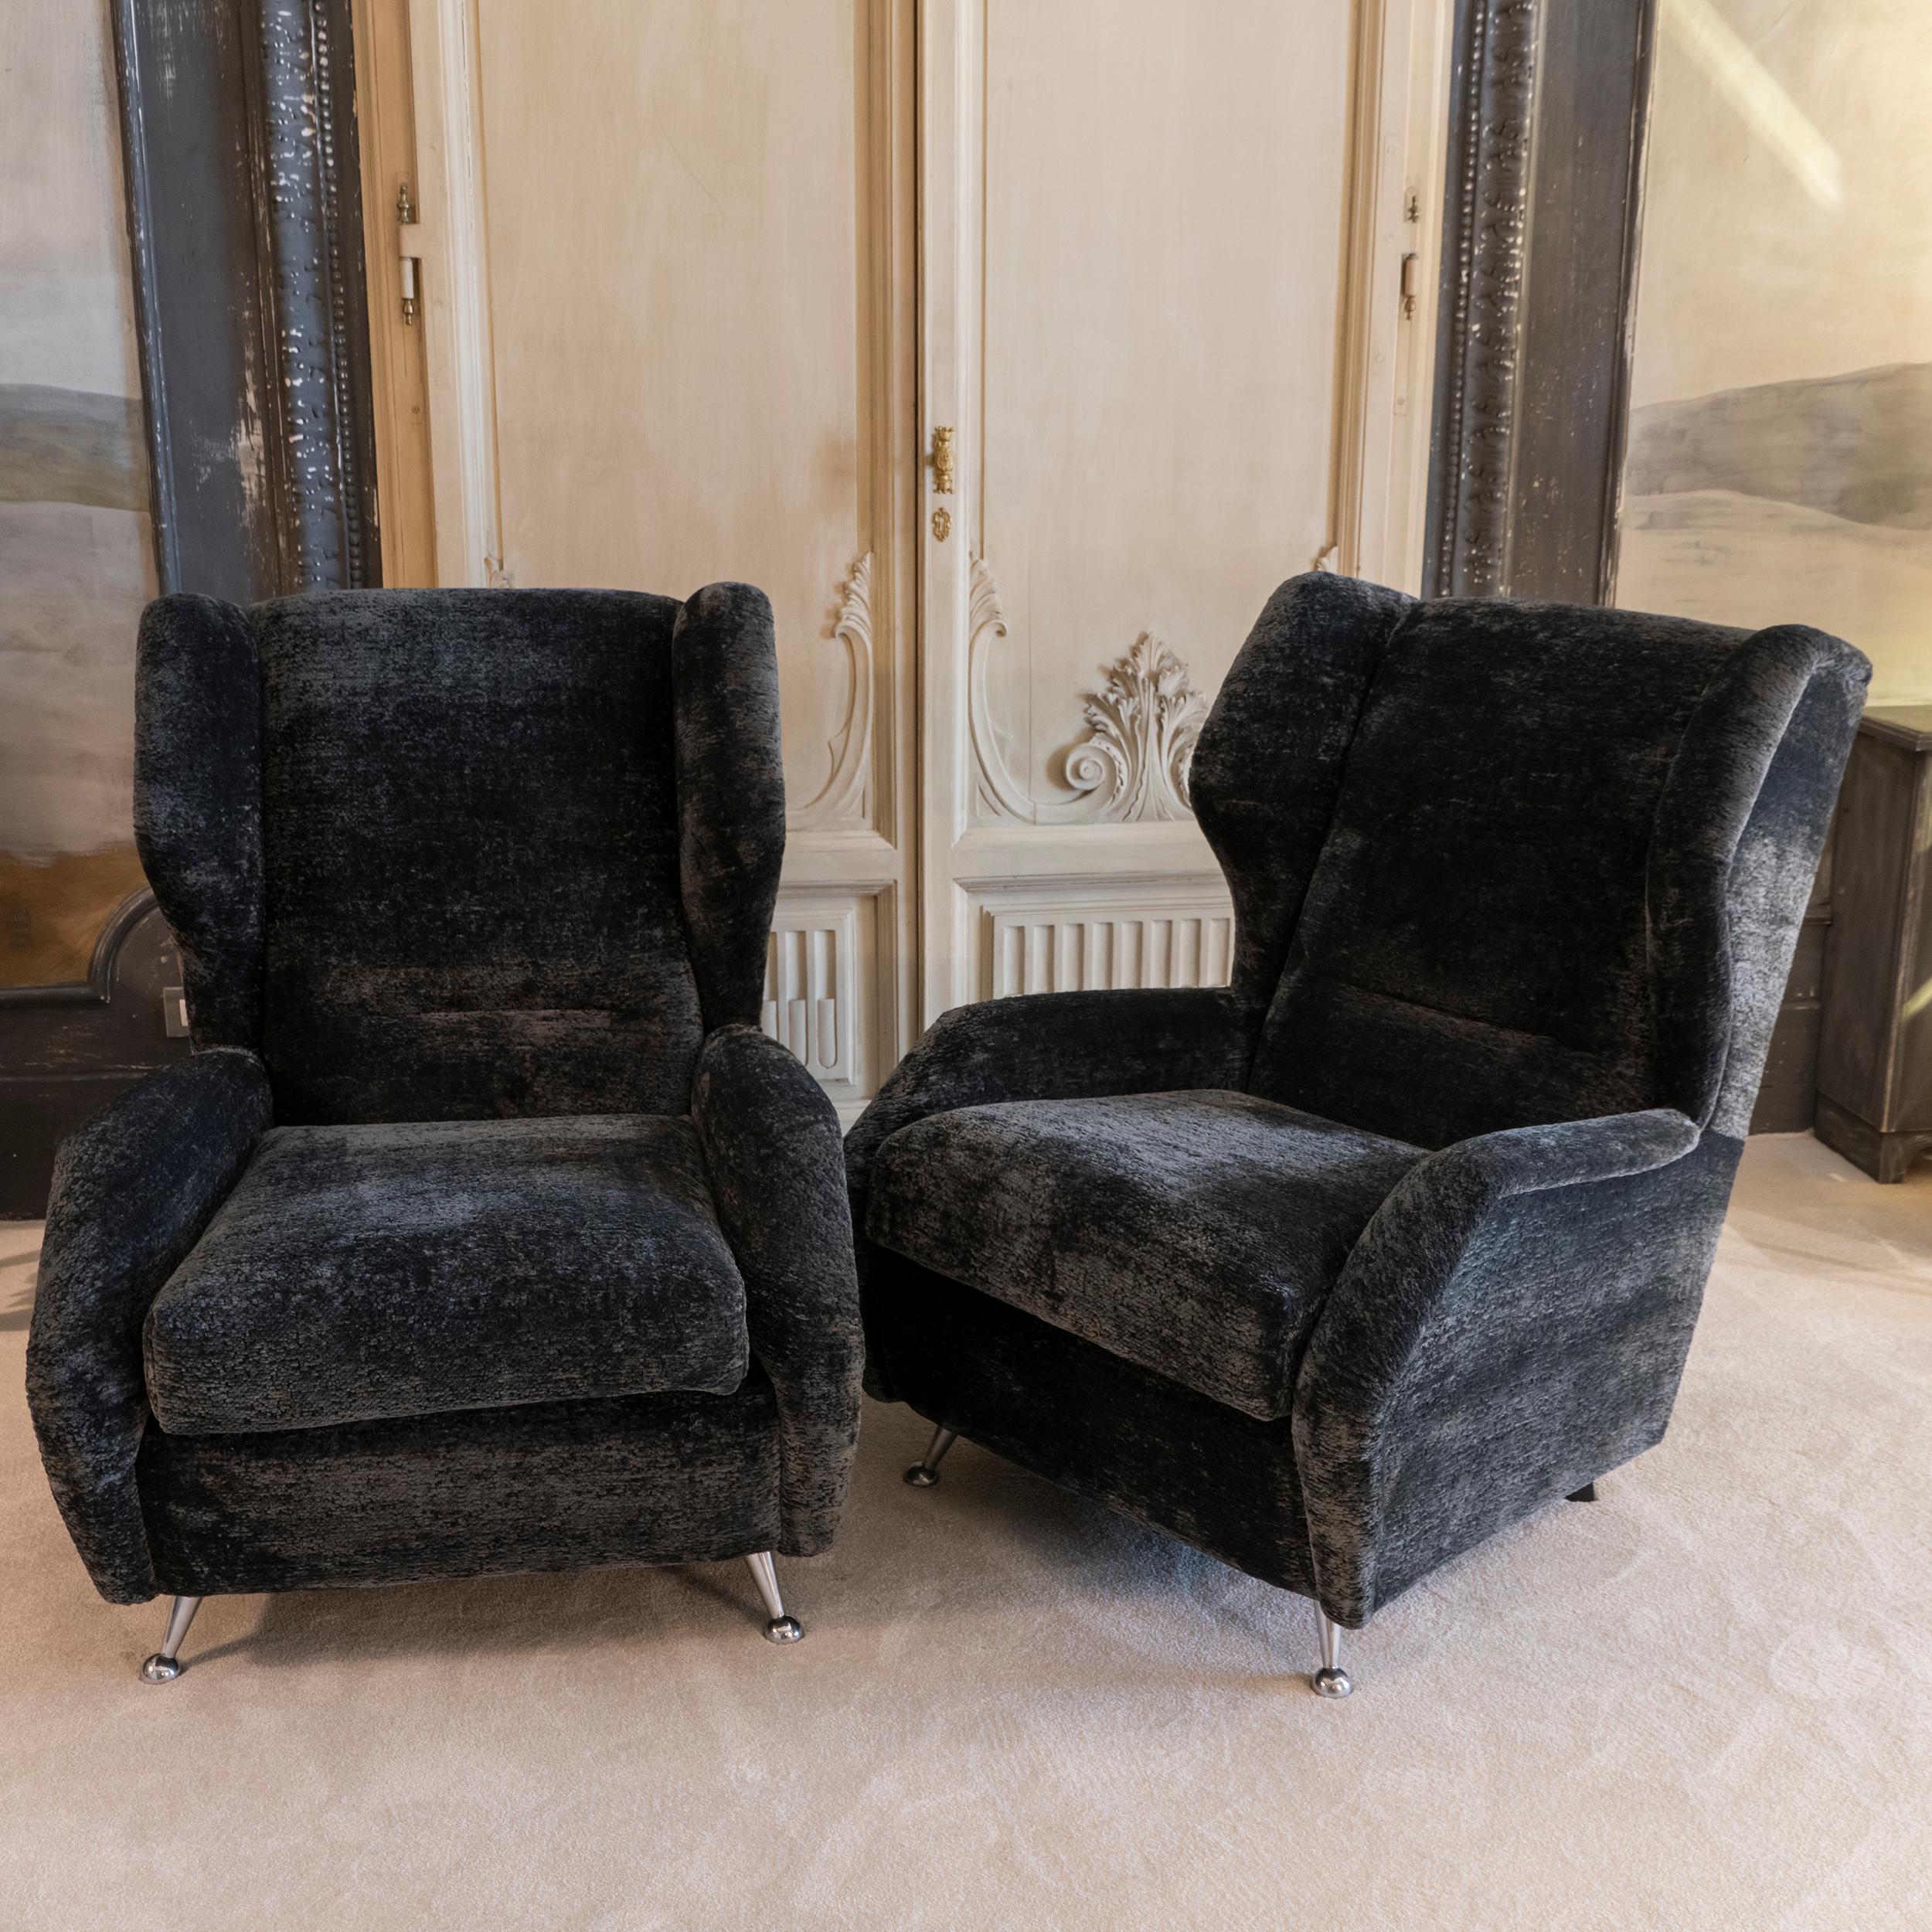 Pair of 1950's Italian Bergere newly reupholstered in gun metal grey chenille velvet, back feet in black wood and front feet in chrome.